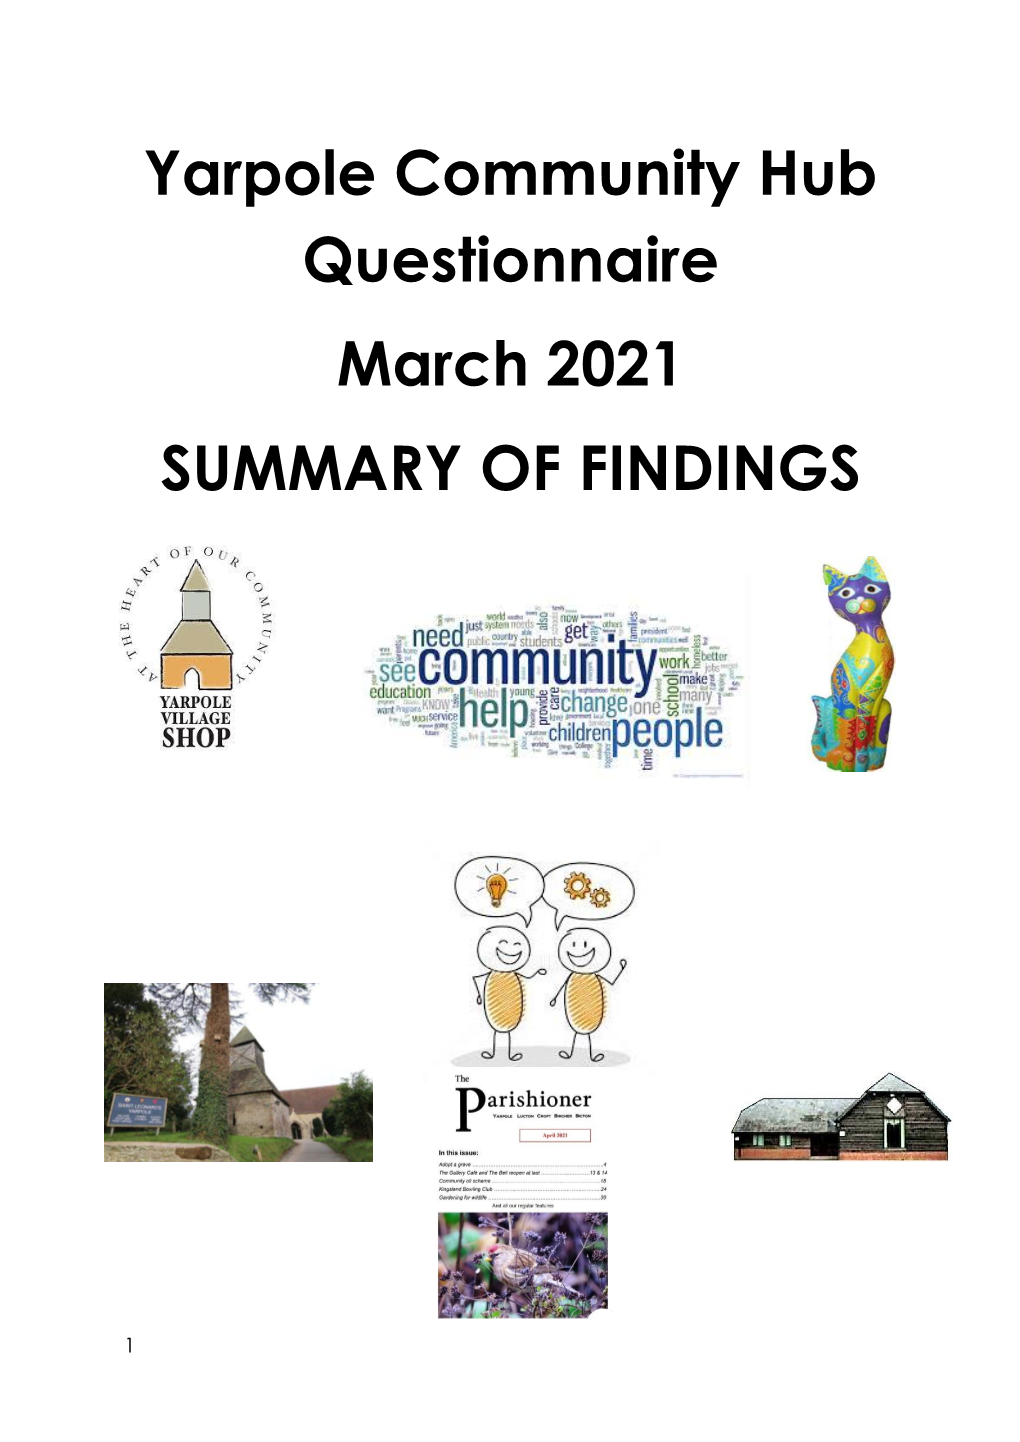 Yarpole Community Hub Questionnaire March 2021 SUMMARY of FINDINGS